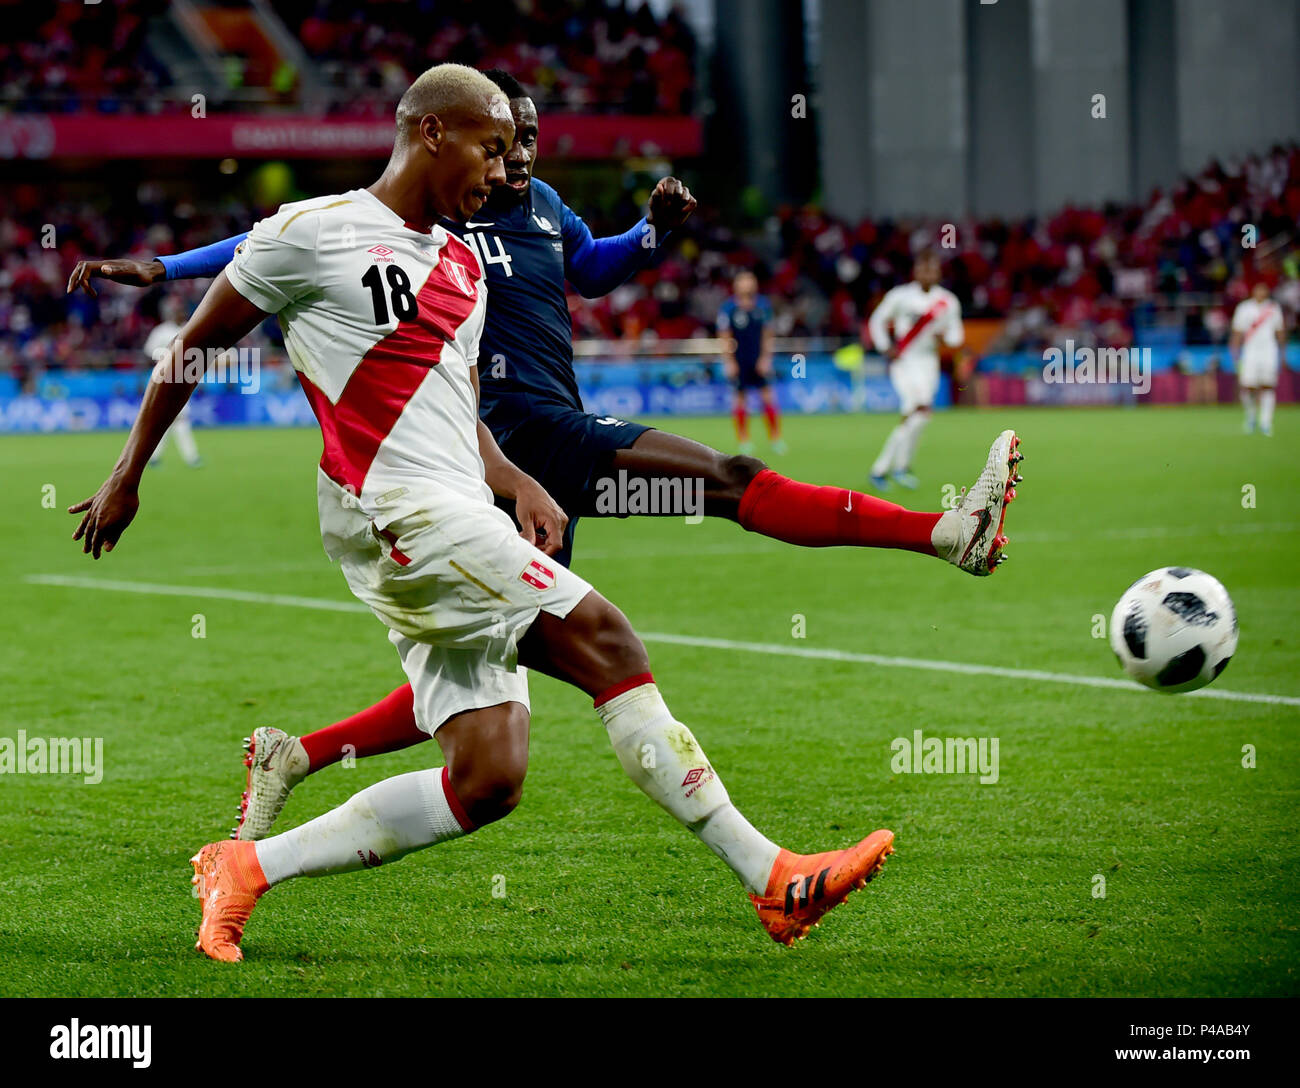 Yekaterinburg, Russia. 21st June, 2018. Blaise Matuidi (back) of France vies with Andre Carrillo of Peru during the 2018 FIFA World Cup Group C match between France and Peru in Yekaterinburg, Russia, June 21, 2018. Credit: Du Yu/Xinhua/Alamy Live News Stock Photo